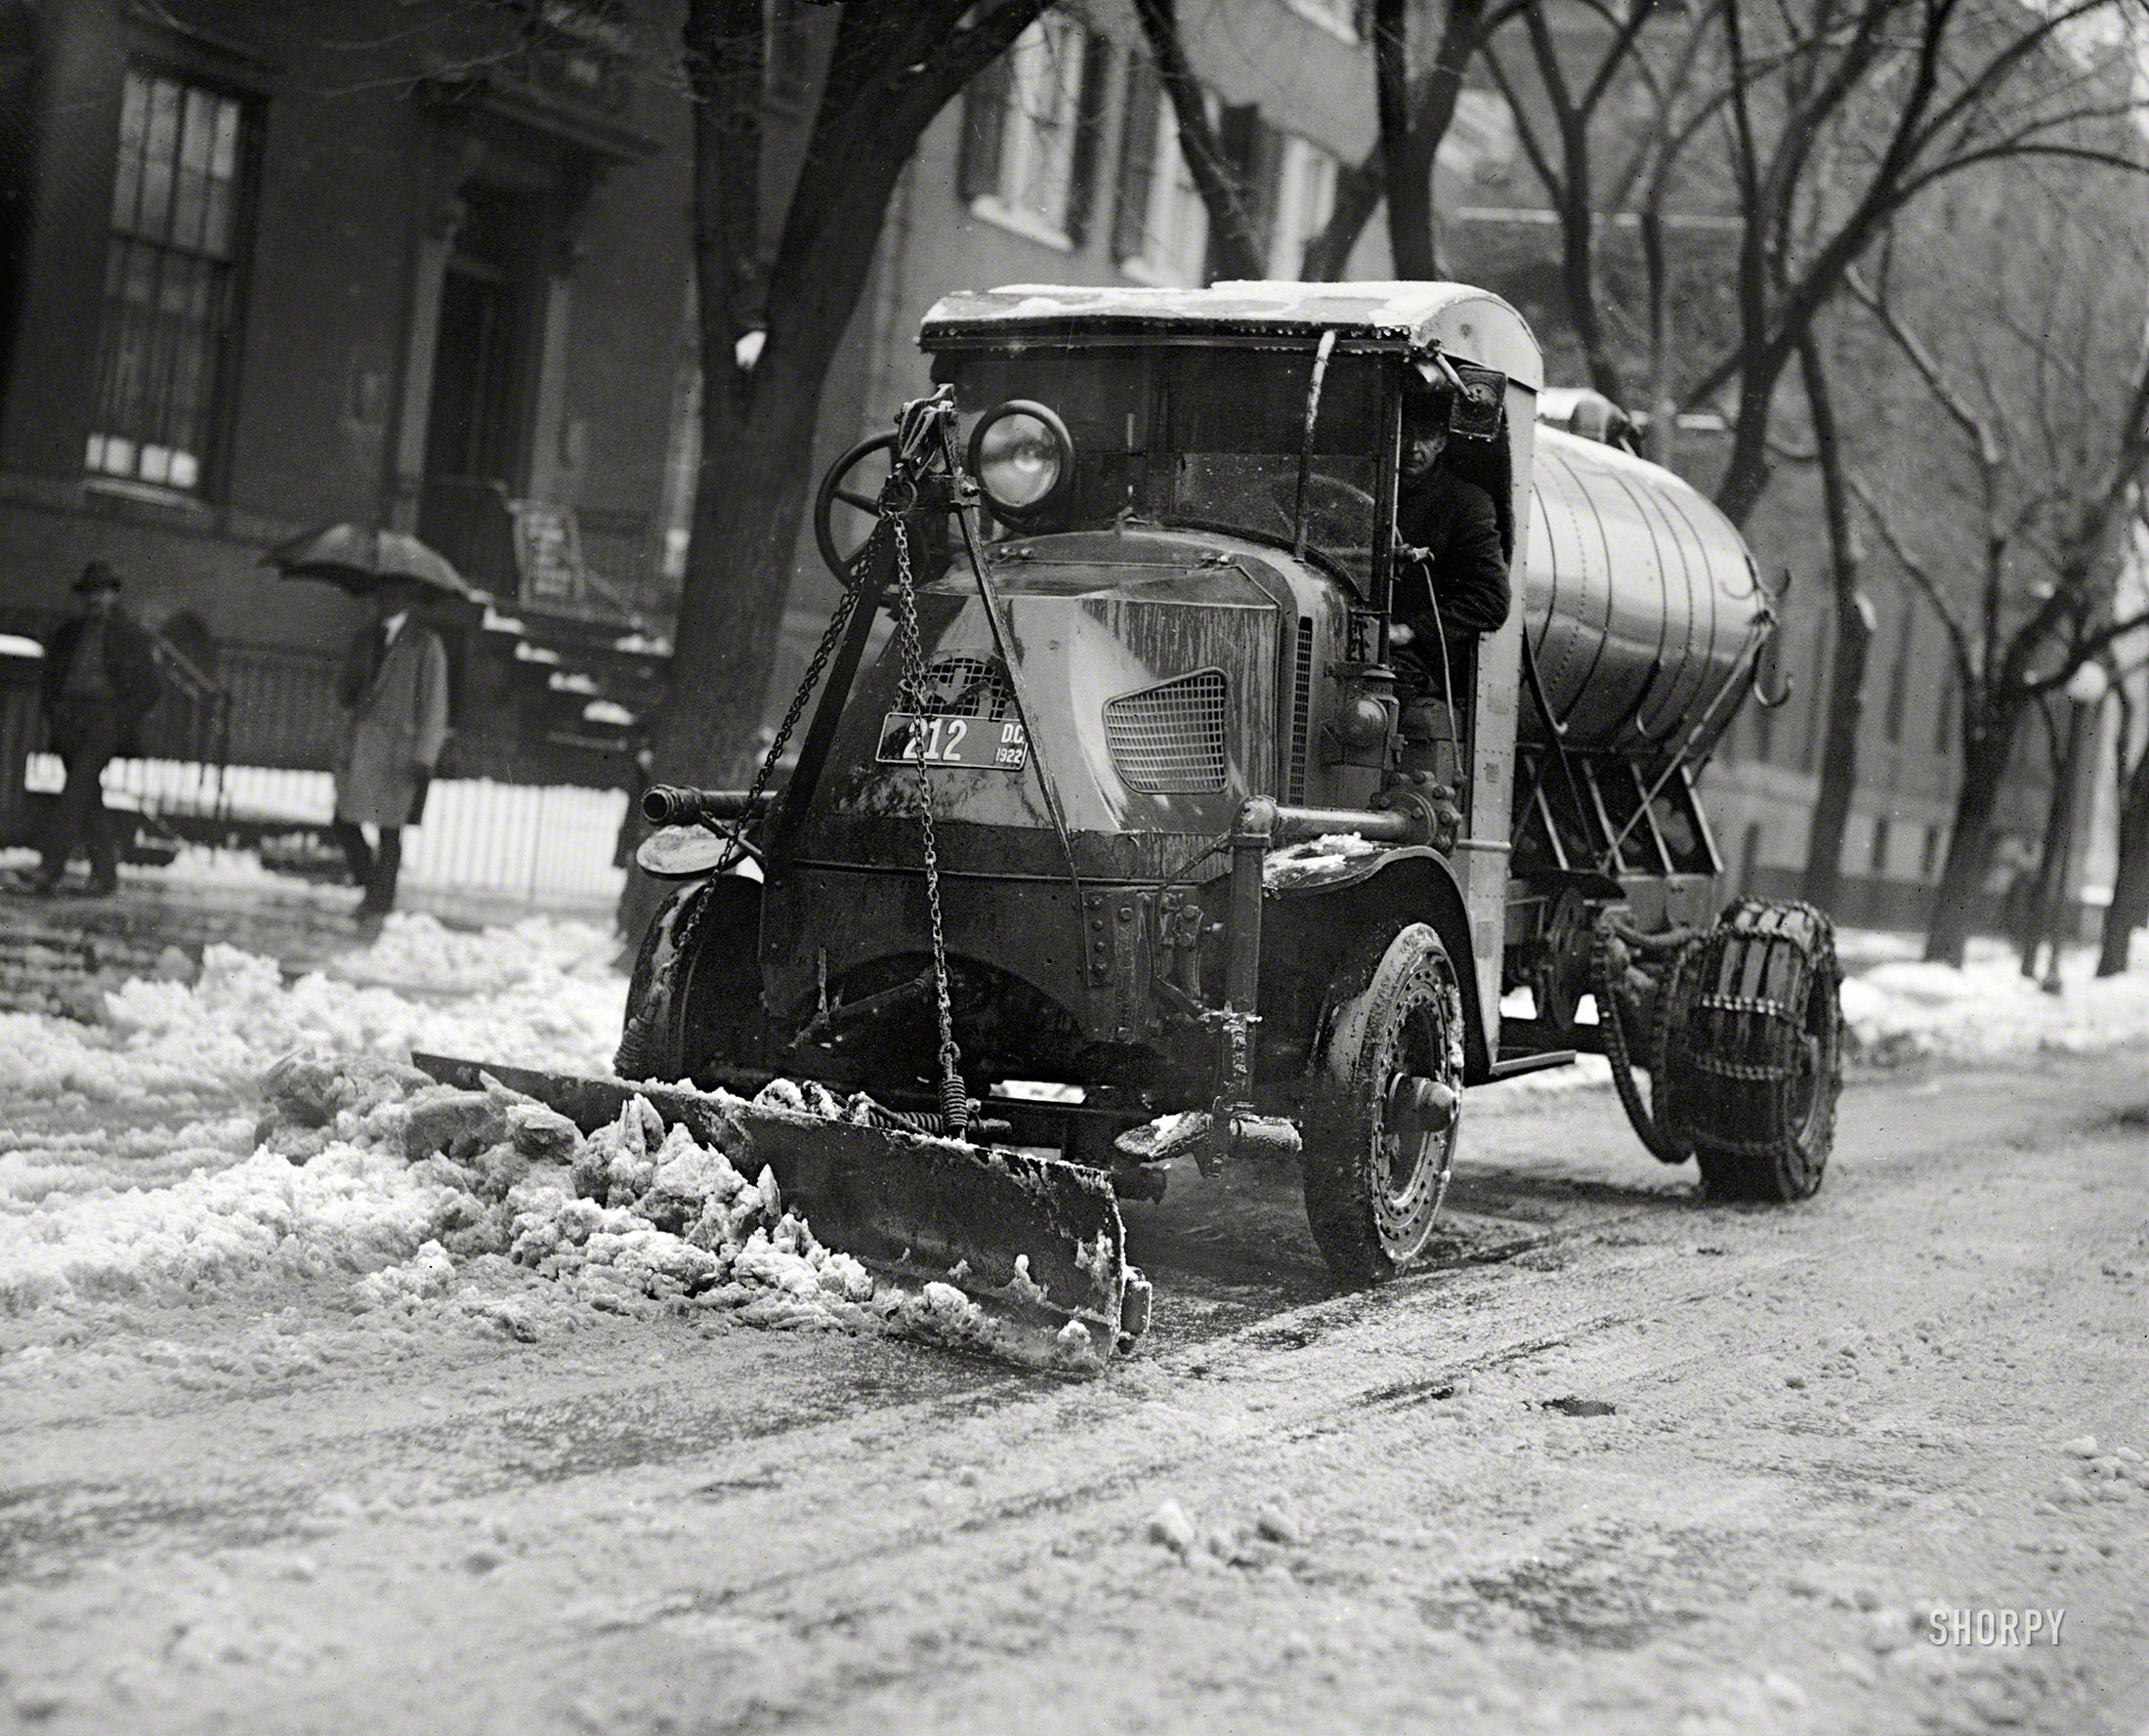 Washington, D.C., 1922. "Tank truck with plow clearing snow." Who'll be first to ID the street? National Photo Company glass negative. View full size.